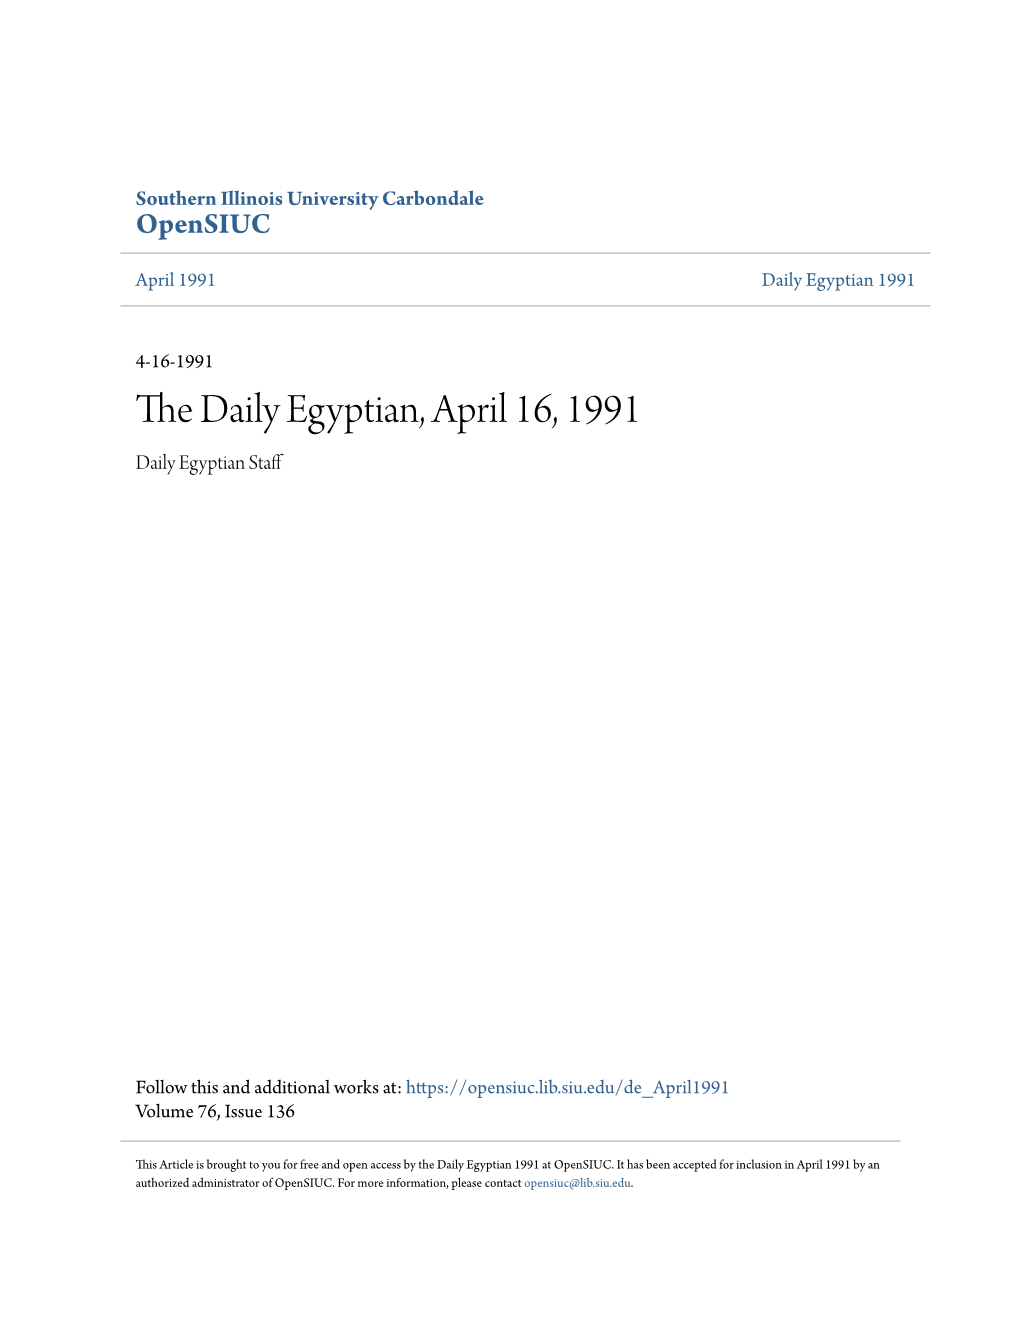 The Daily Egyptian, April 16, 1991